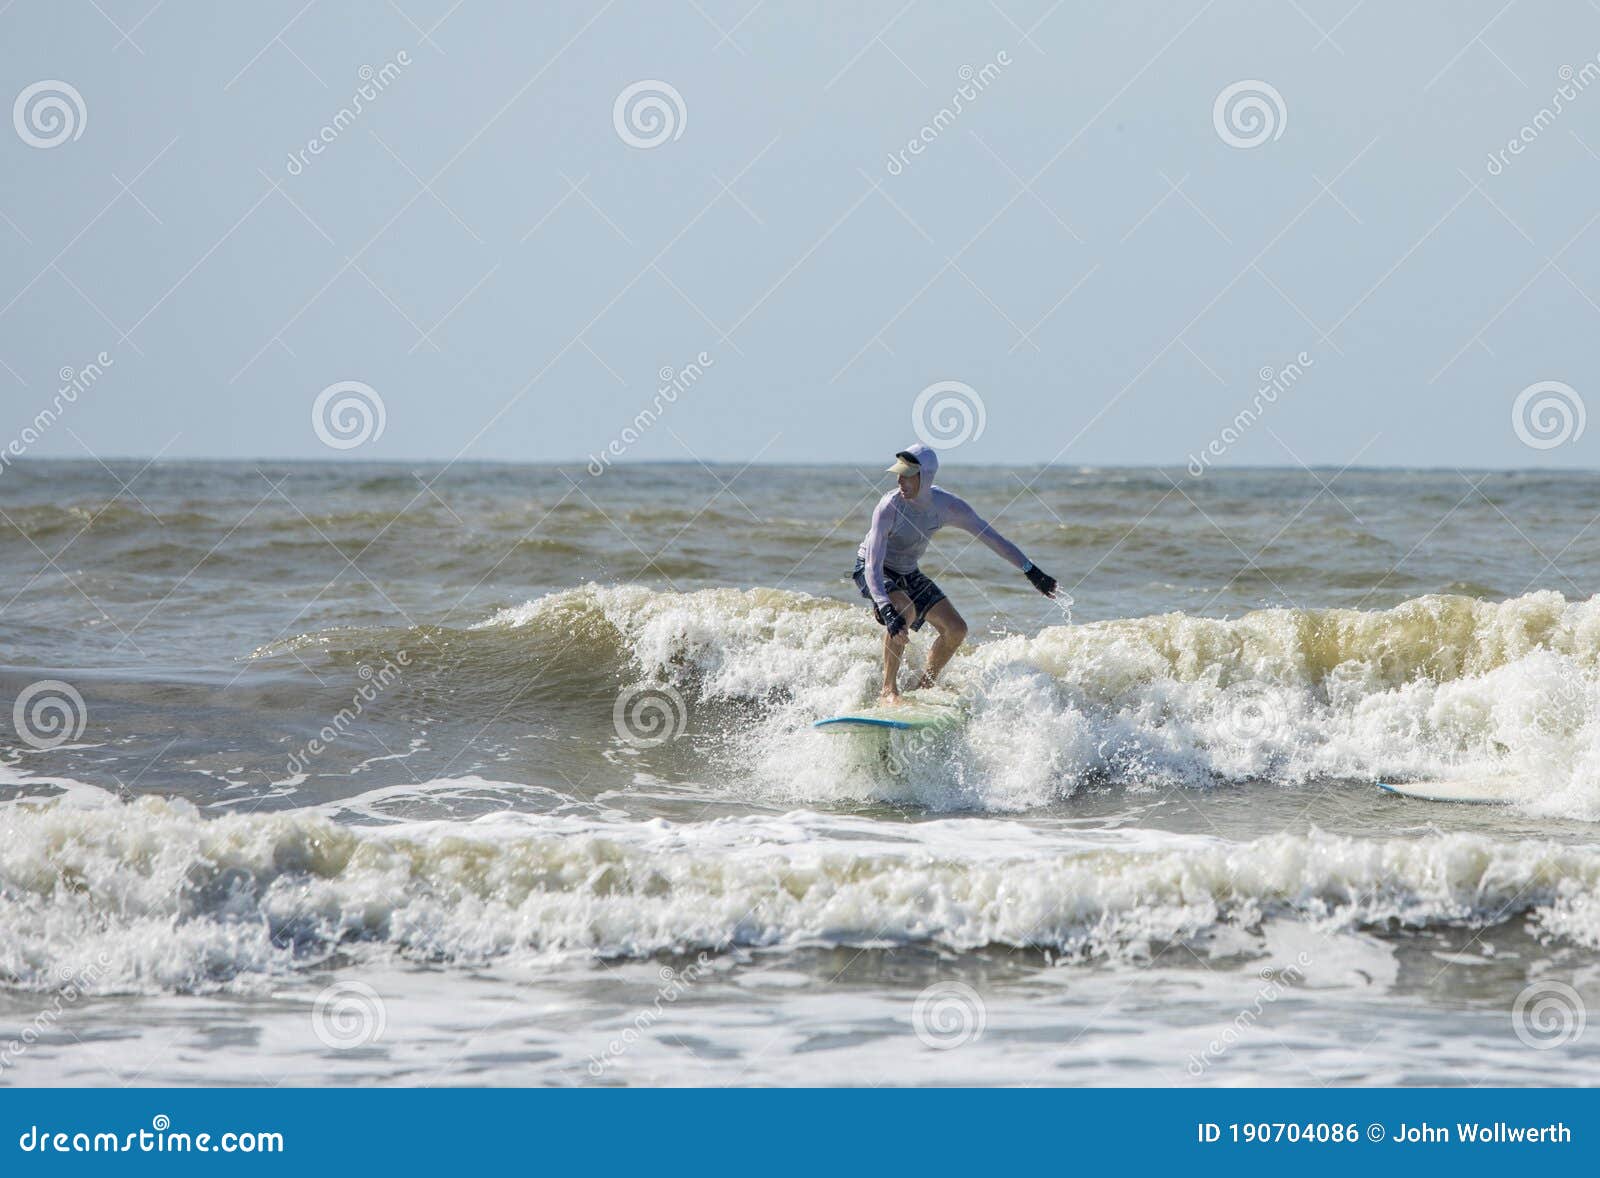 middle aged man surfs on a longboard in the atlantic